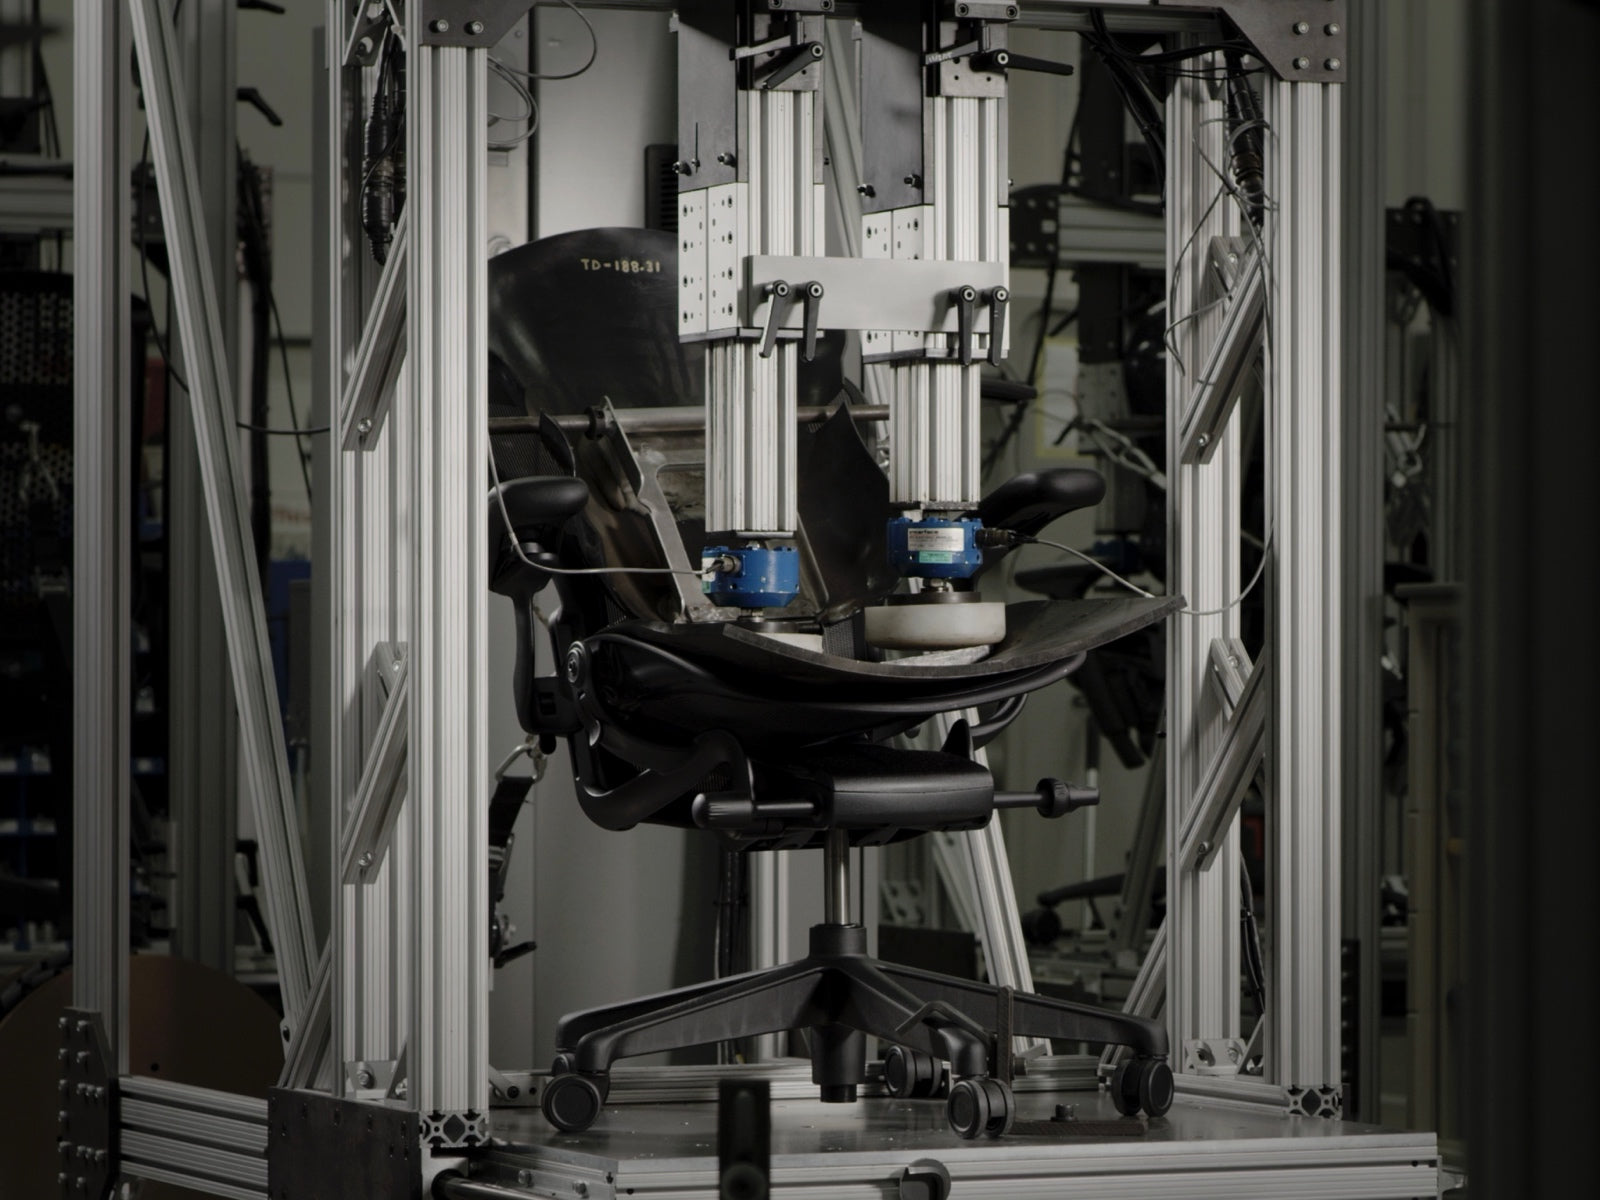 An Embody Gaming Chair, shown from the side, in a testing machine at the Herman Miller manufacturing site.